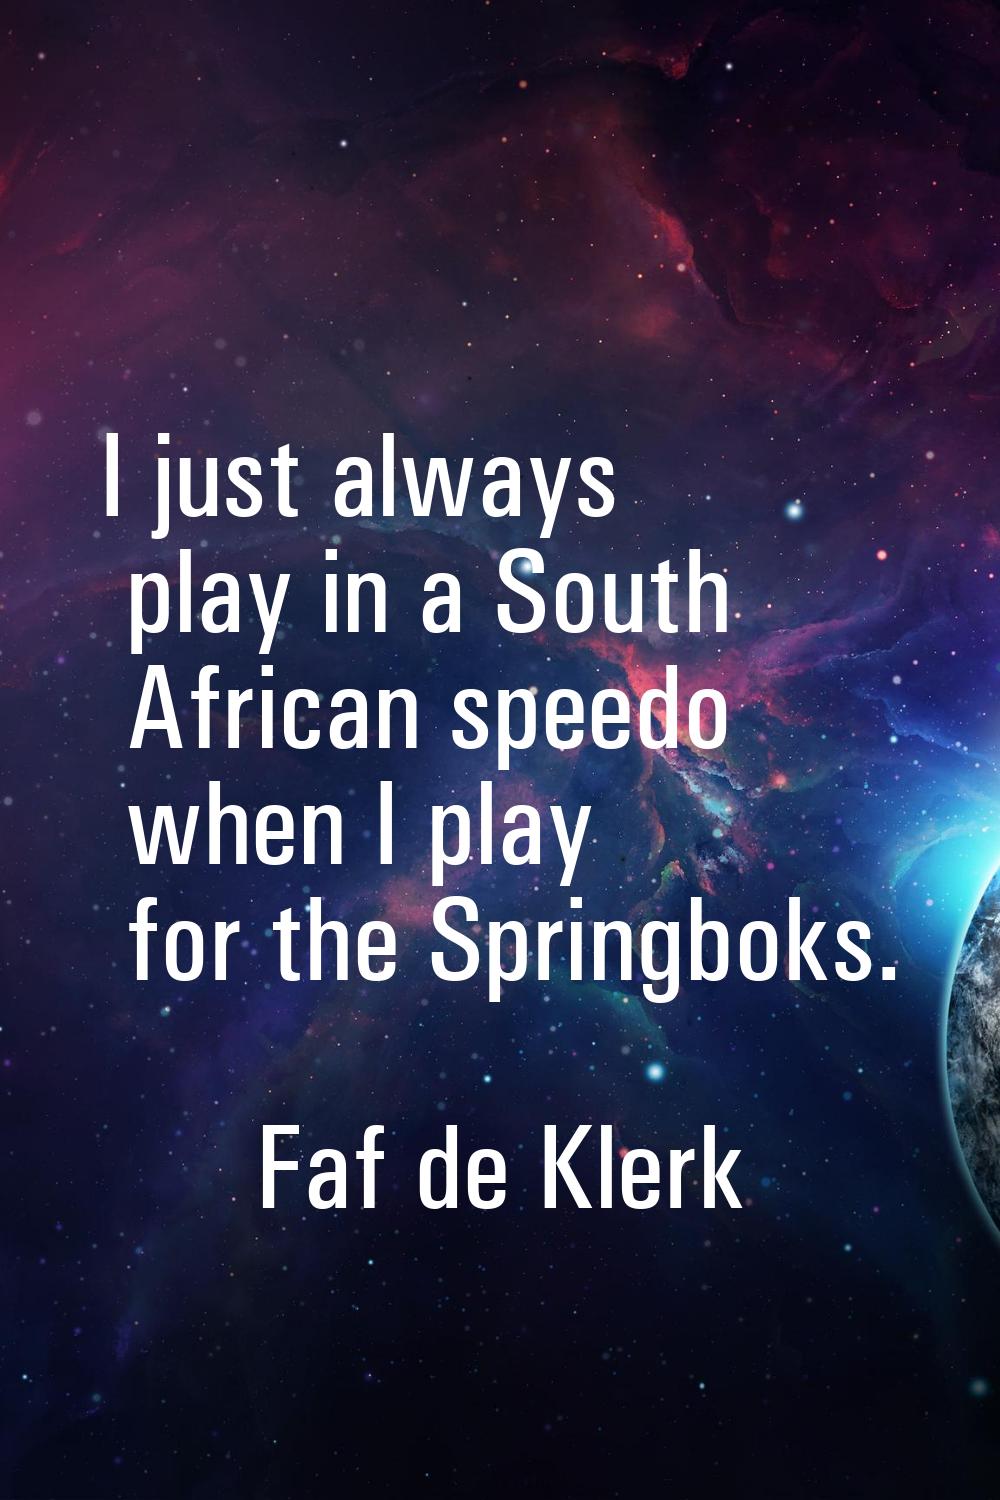 I just always play in a South African speedo when I play for the Springboks.